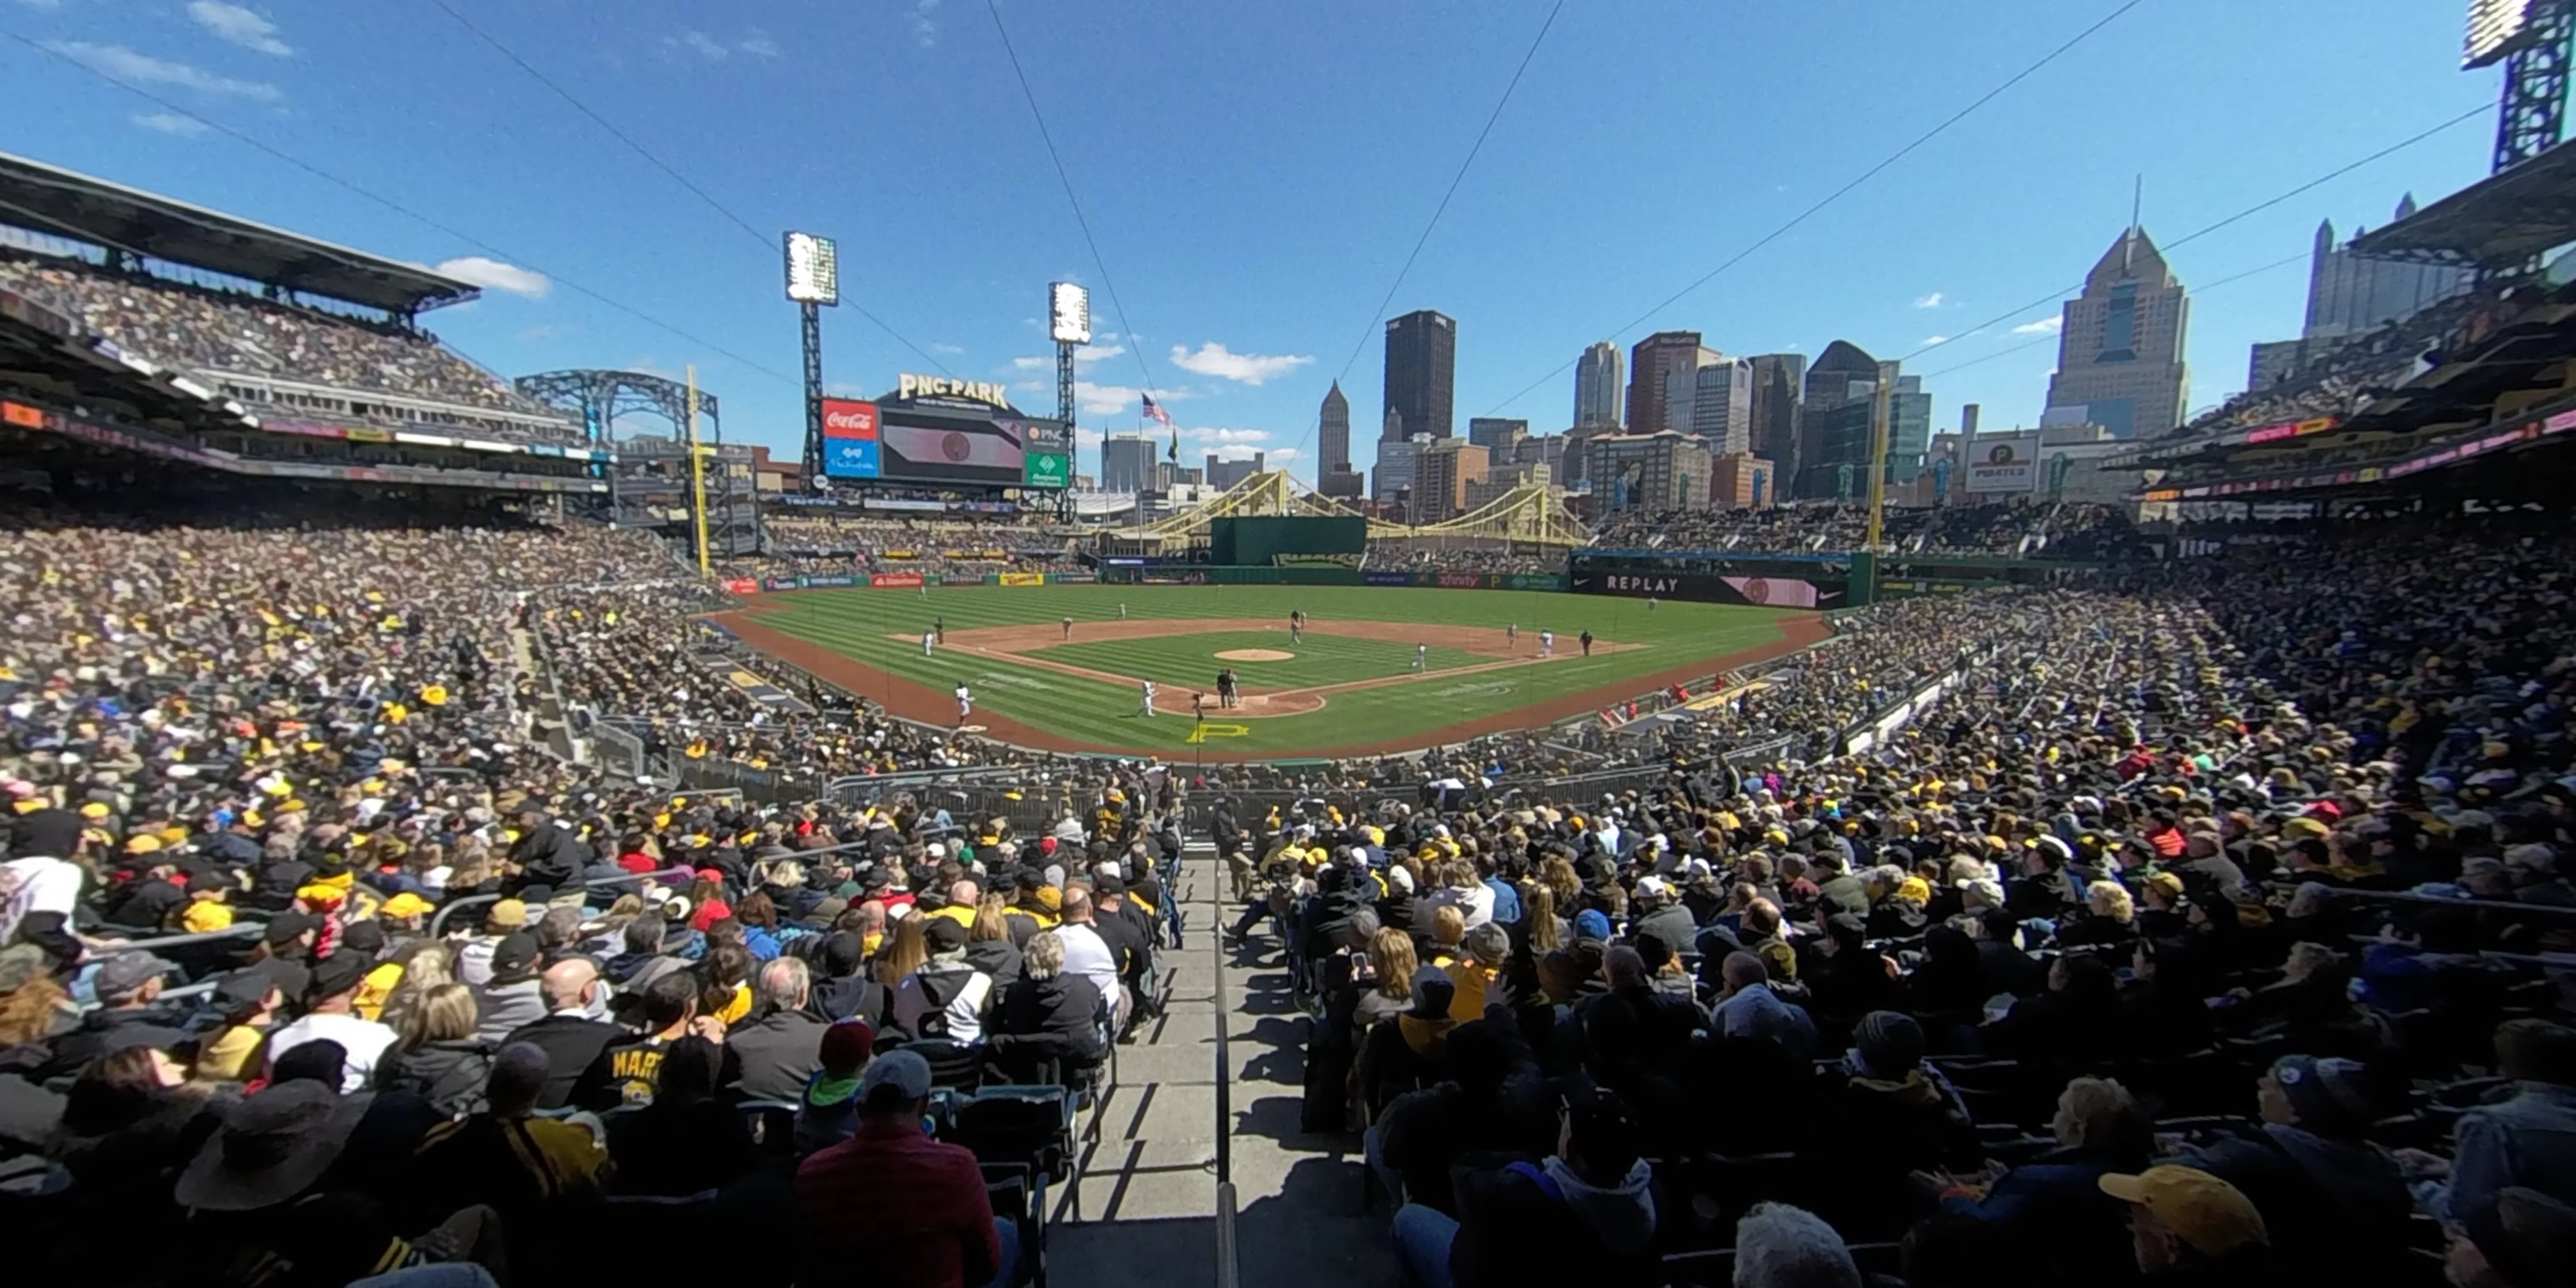 section 115 panoramic seat view  - pnc park